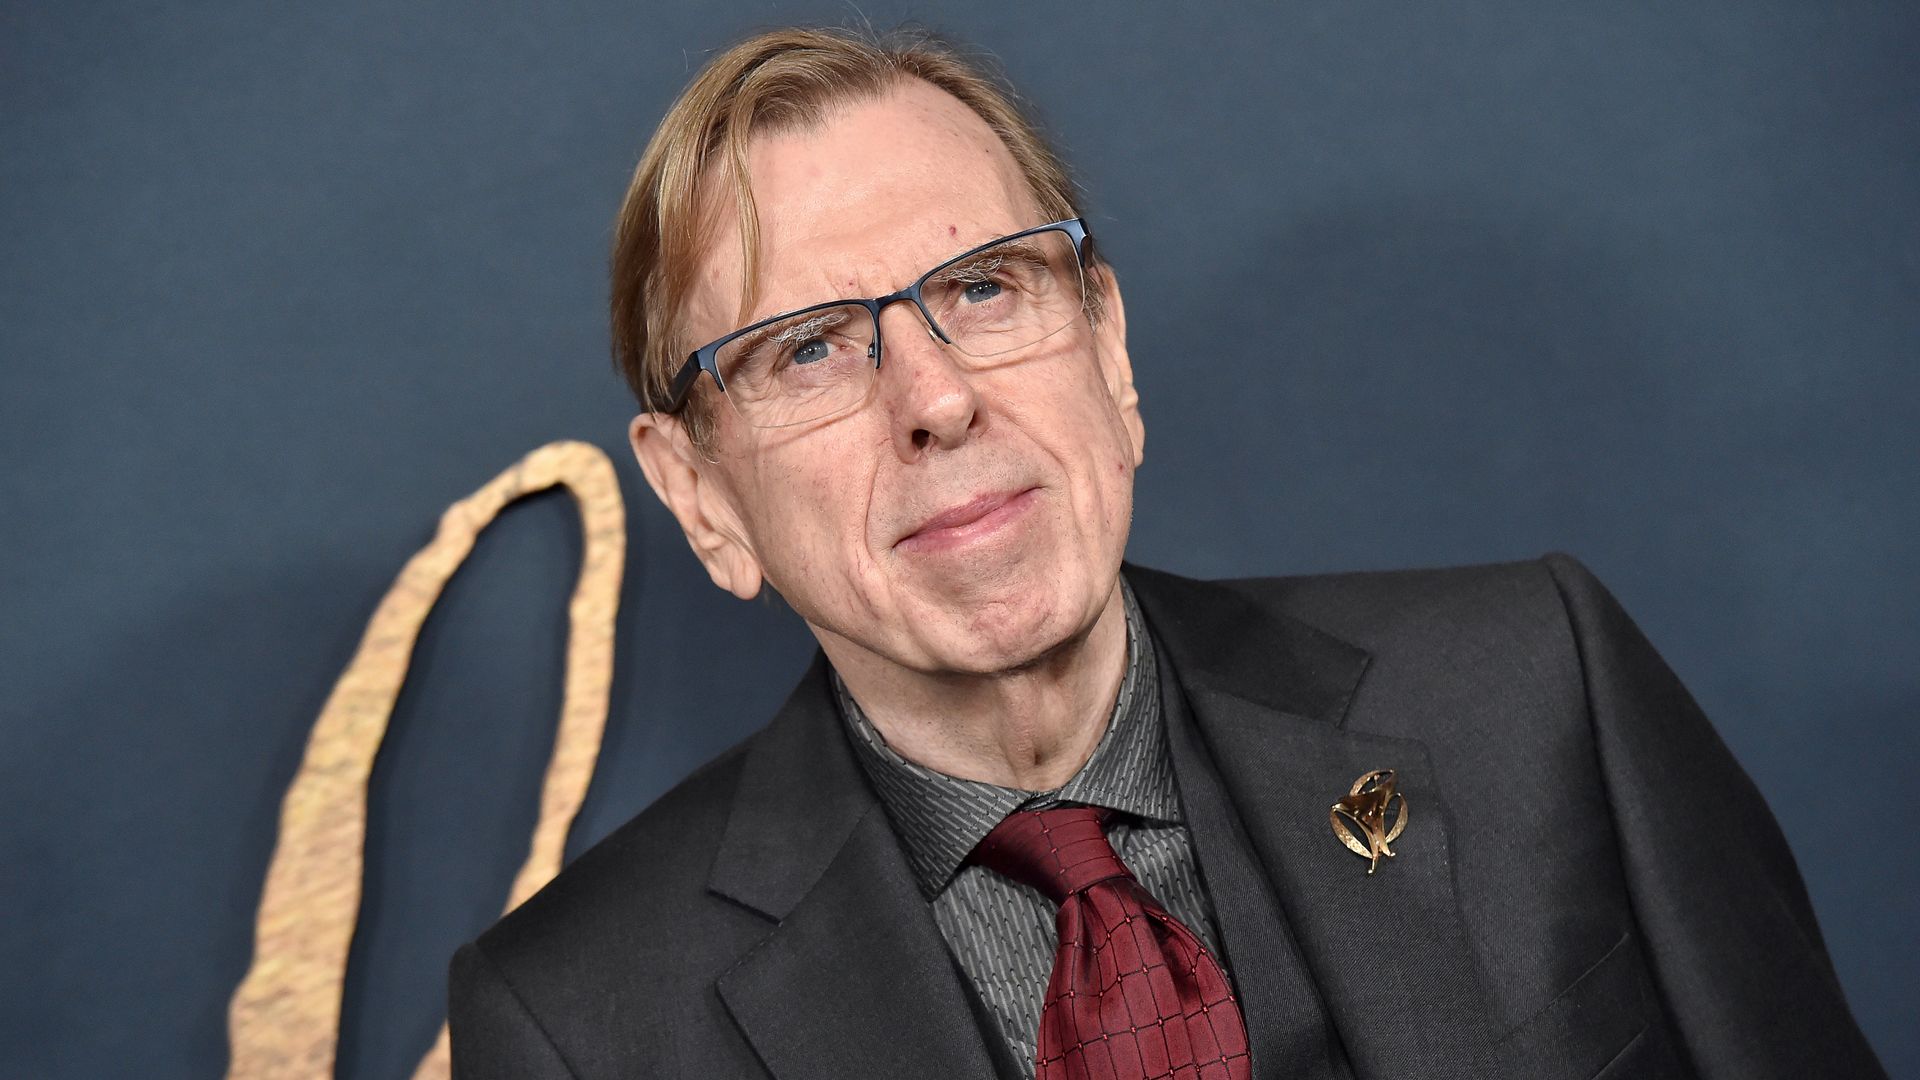 Timothy Spall attends the "The Pale Blue Eye" premiere